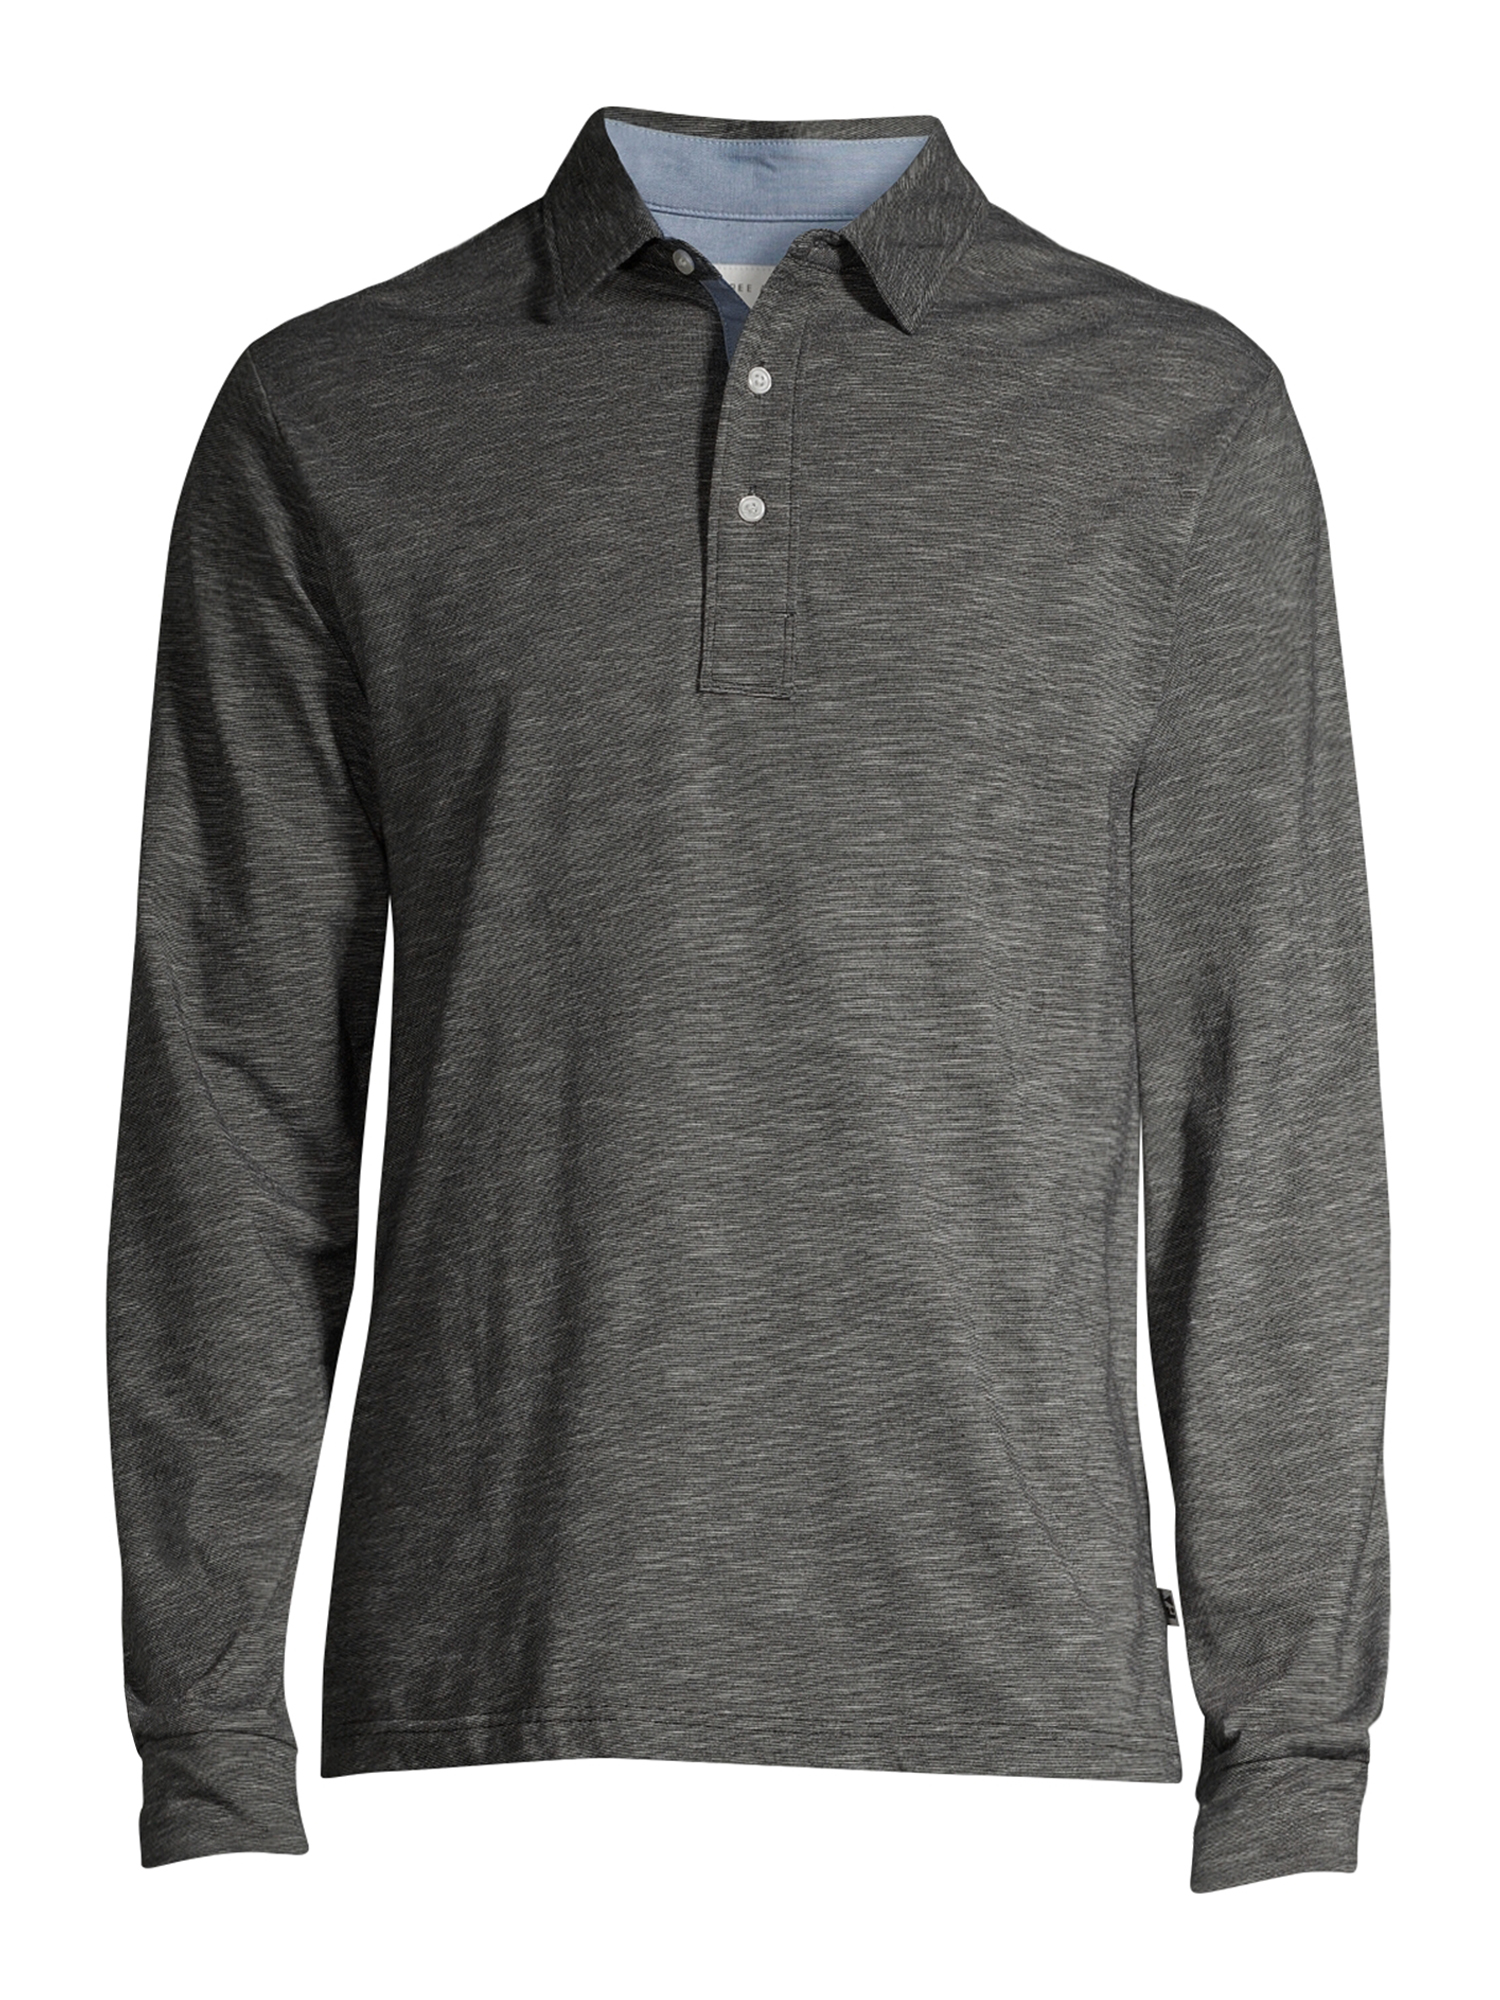 Free Assembly Men's Long Sleeve Textured Jersey Polo Shirt - image 2 of 5